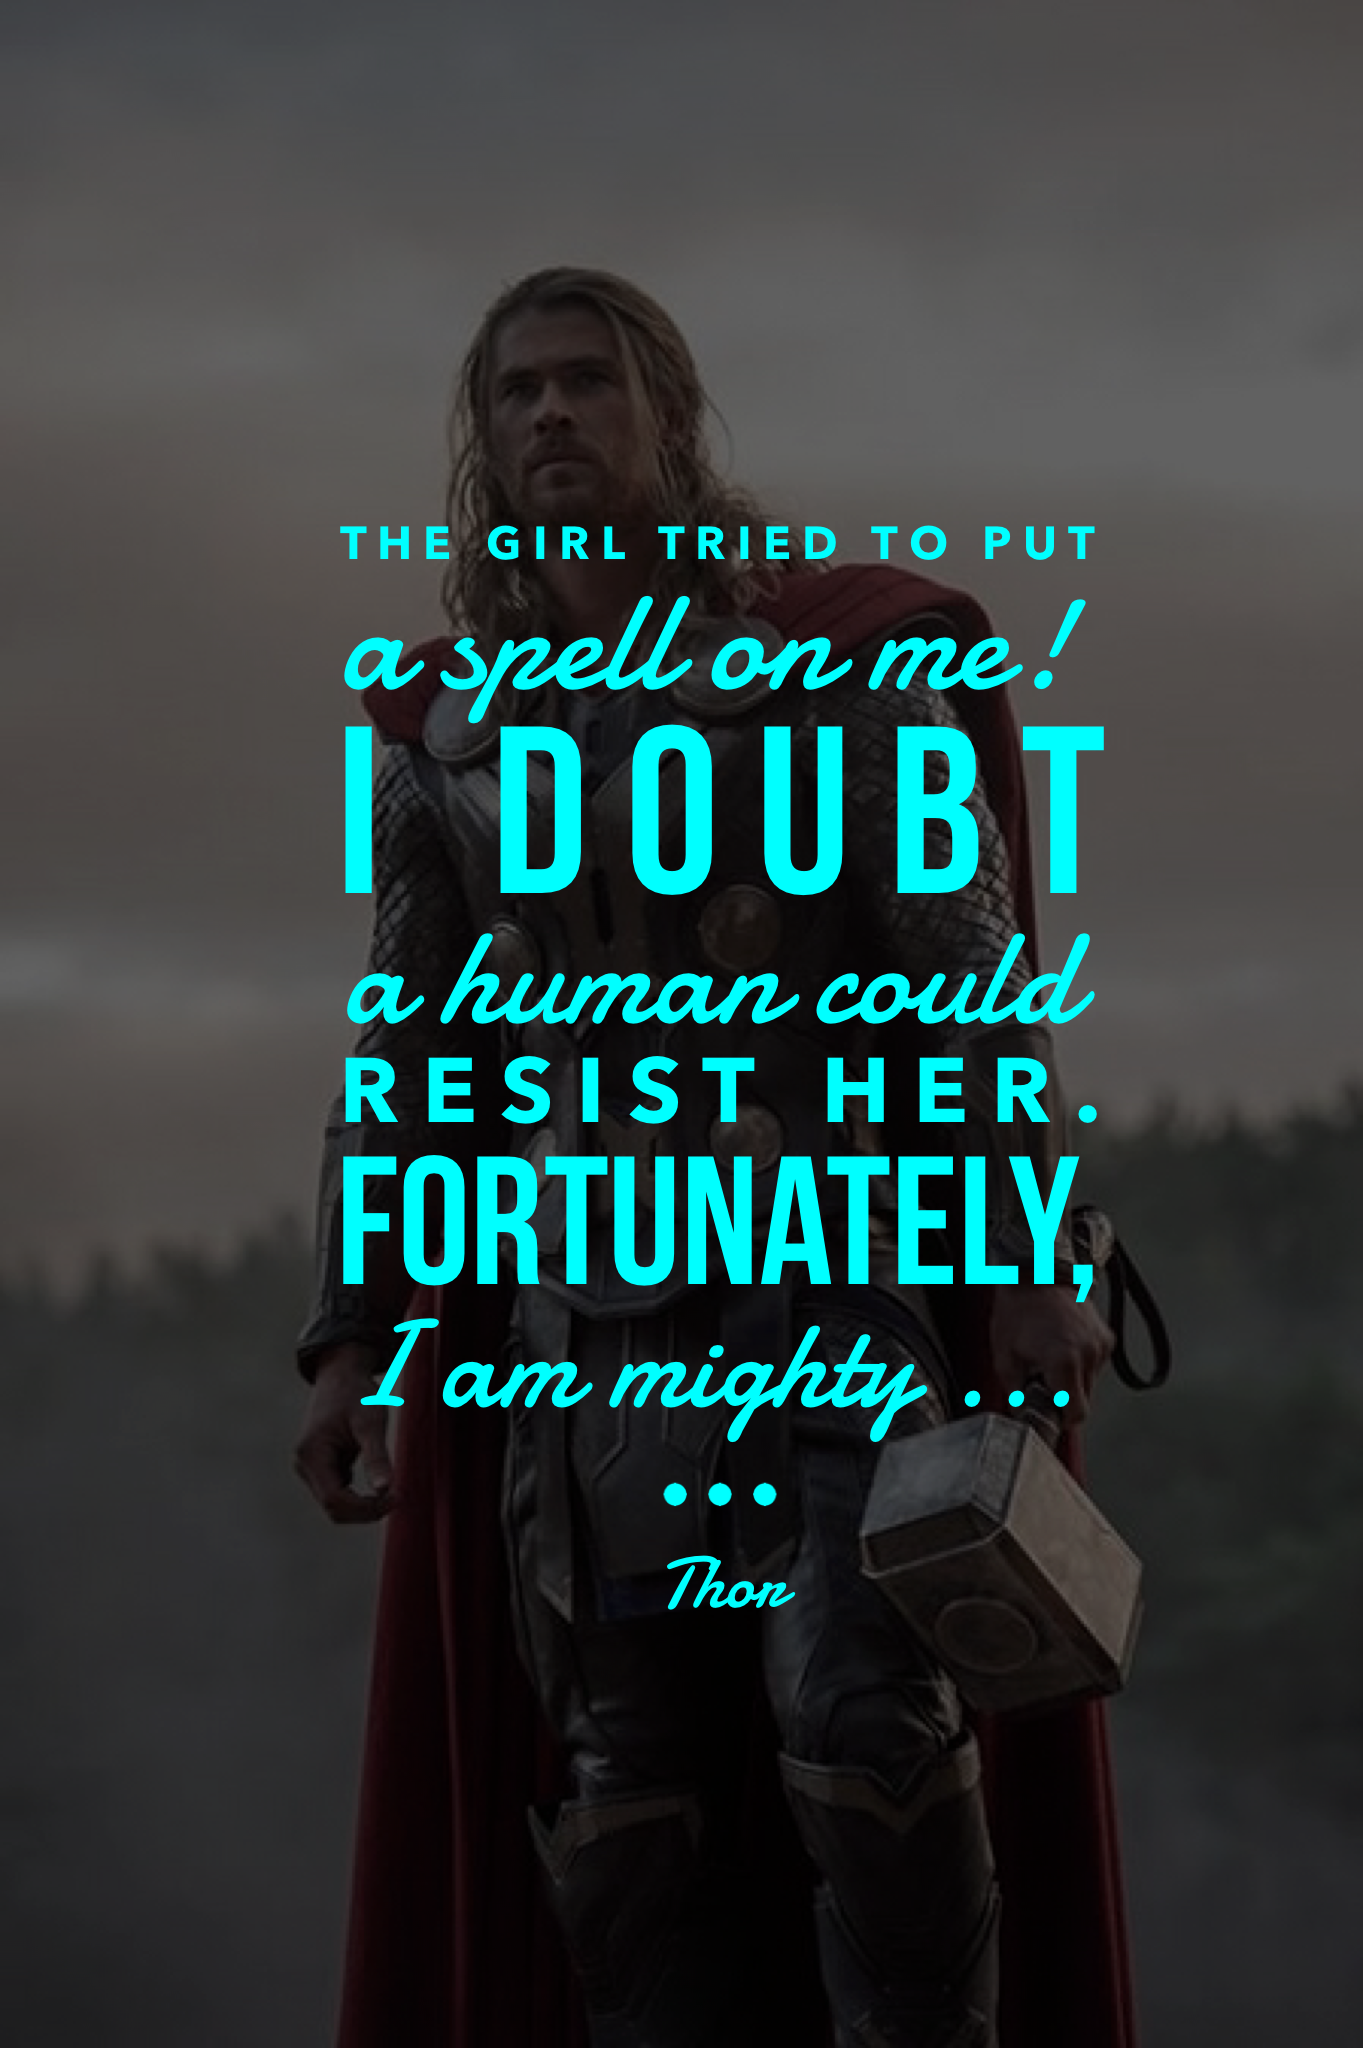 marvel character quote • thor // avengers 2. Character quotes